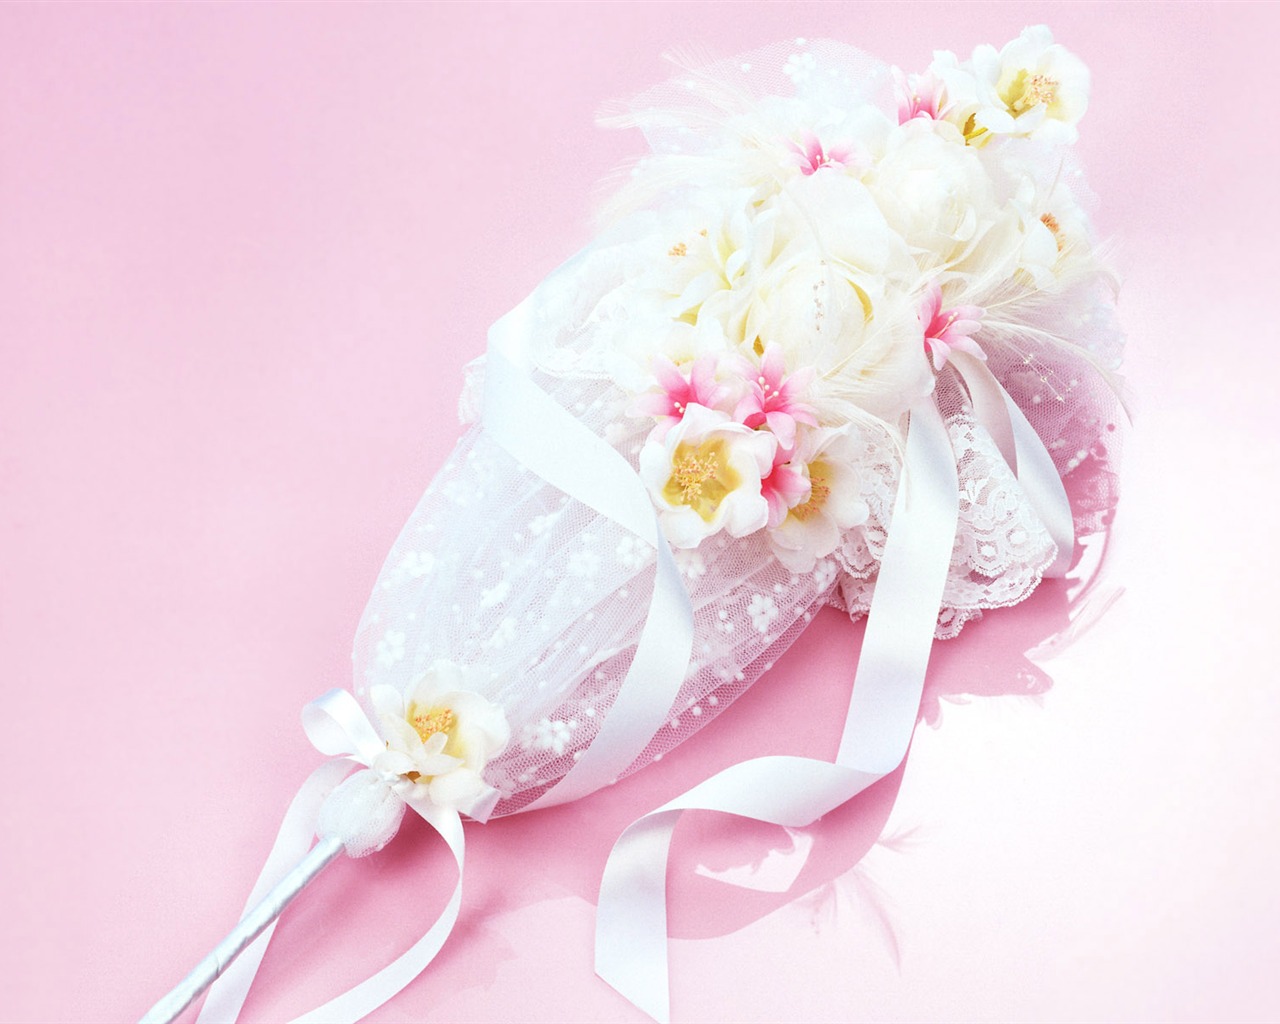 Wedding Flowers items wallpapers (1) #4 - 1280x1024